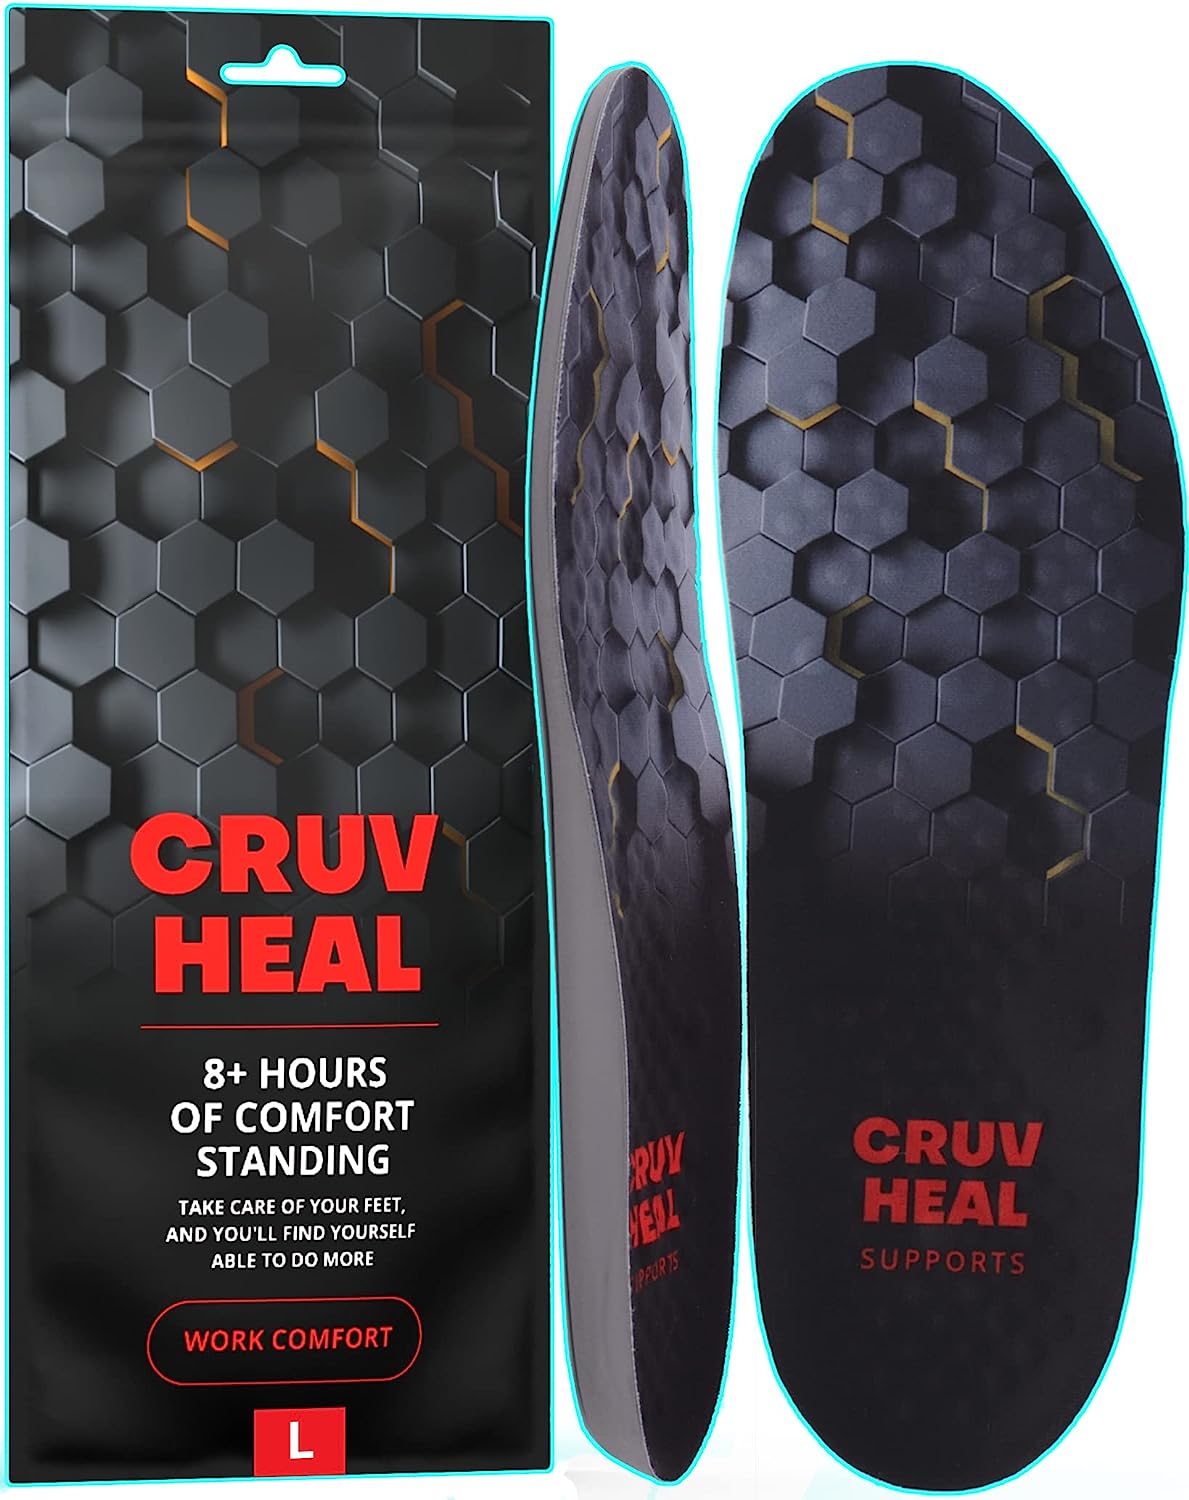 (New) Work Comfort Orthotic Insoles - Anti Fatigue [...]